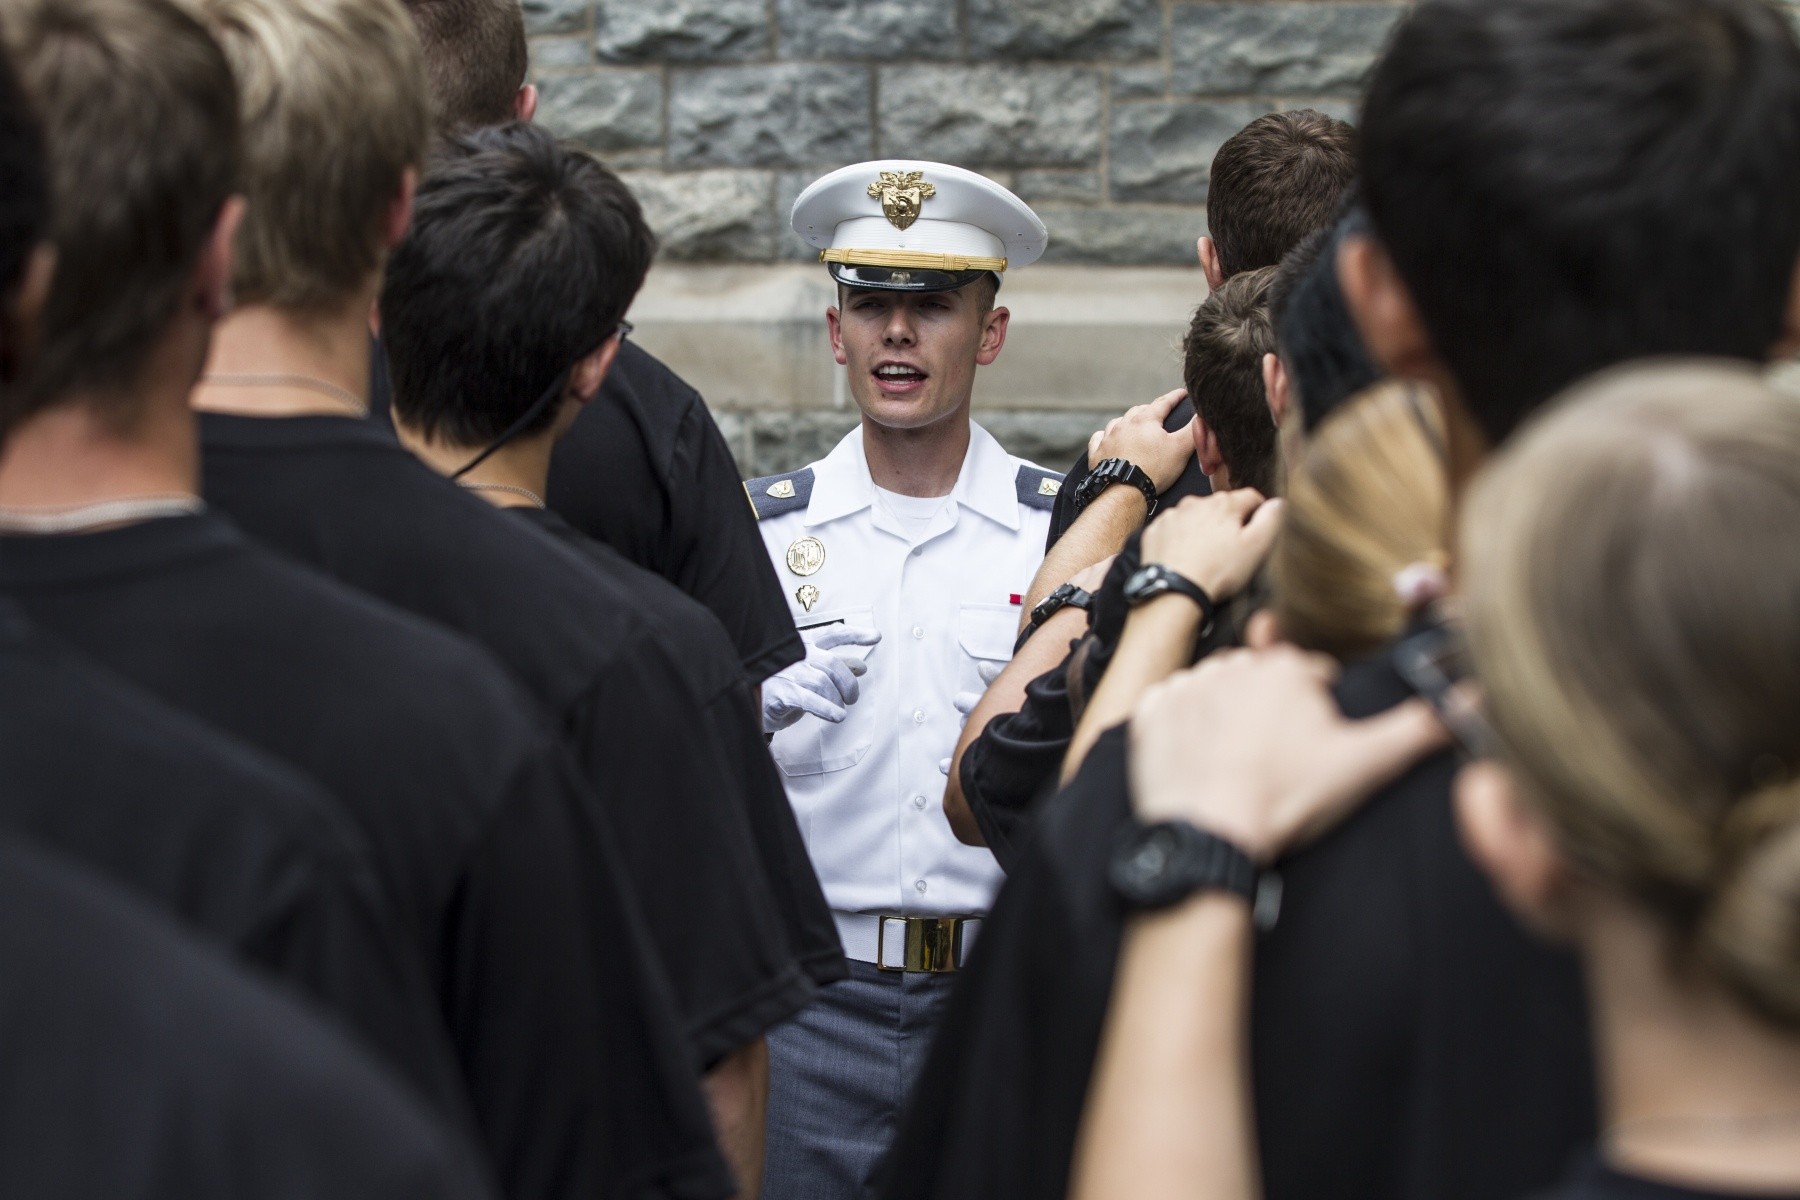 West Point welcomes future cadets on R-day | Article | The United